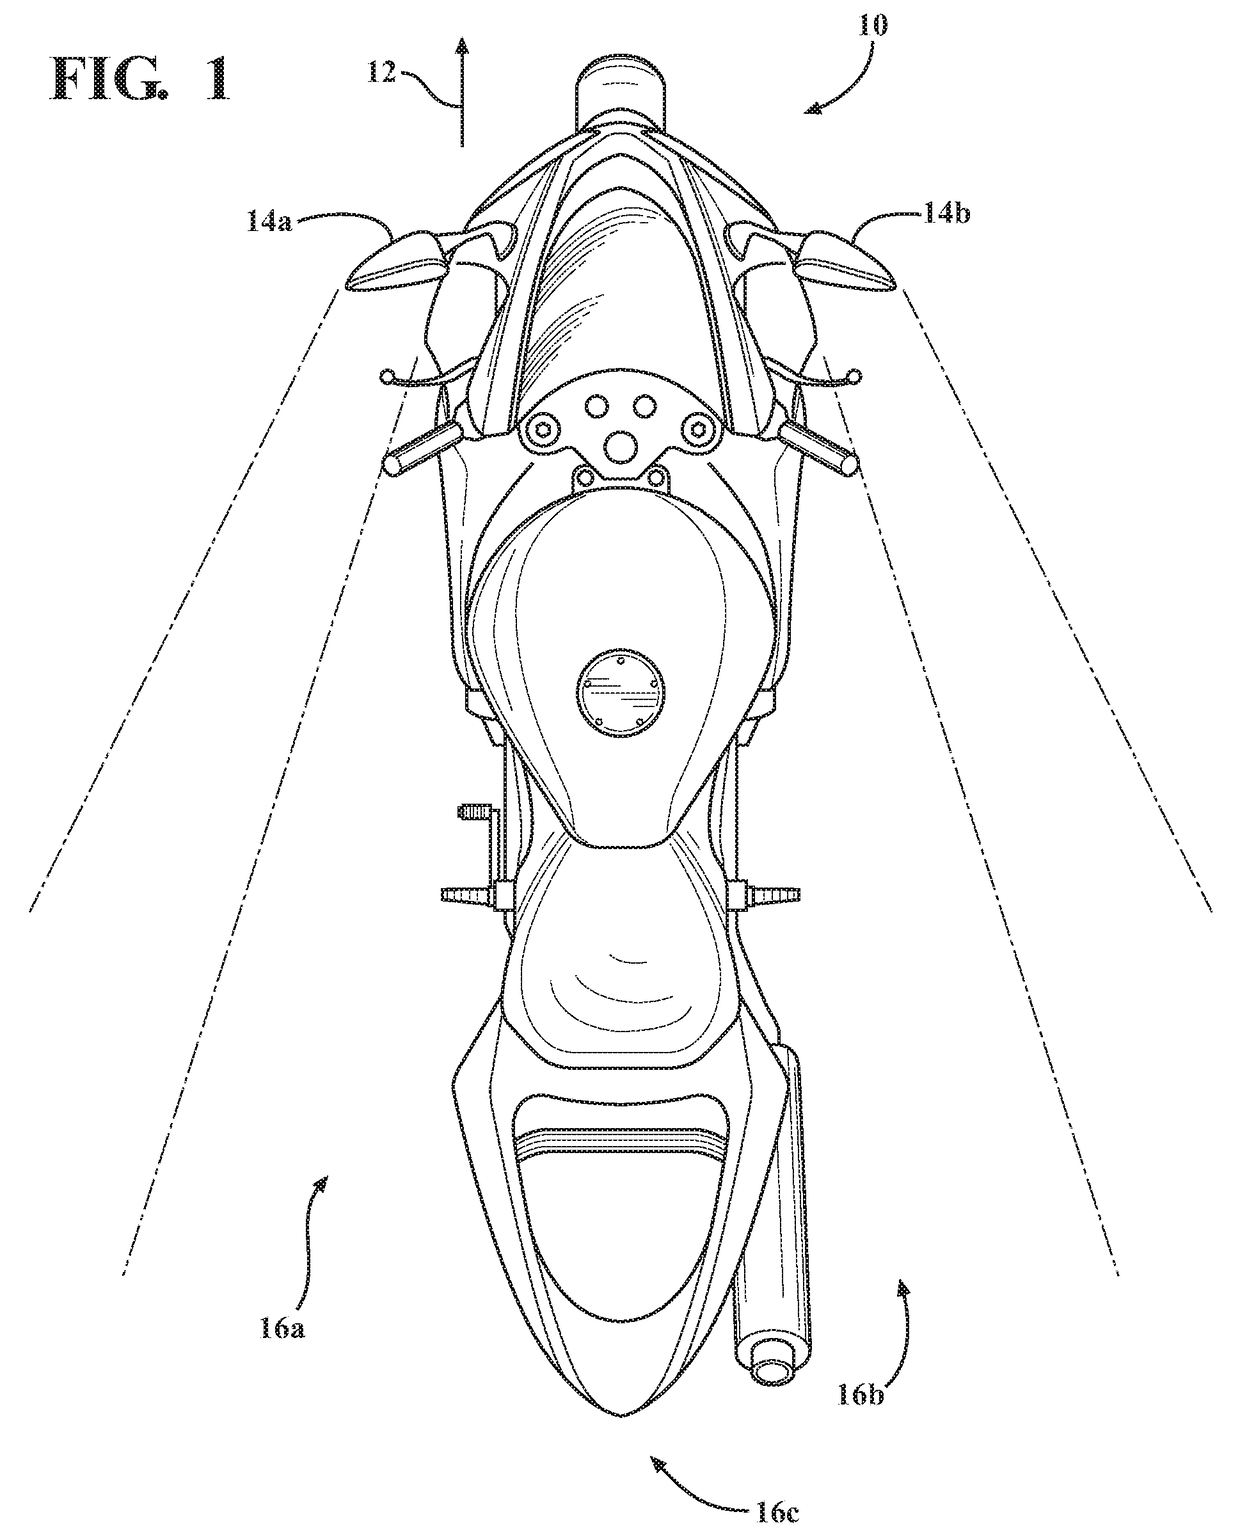 Motorcycle blind spot detection system and rear collision alert using mechanically aligned radar